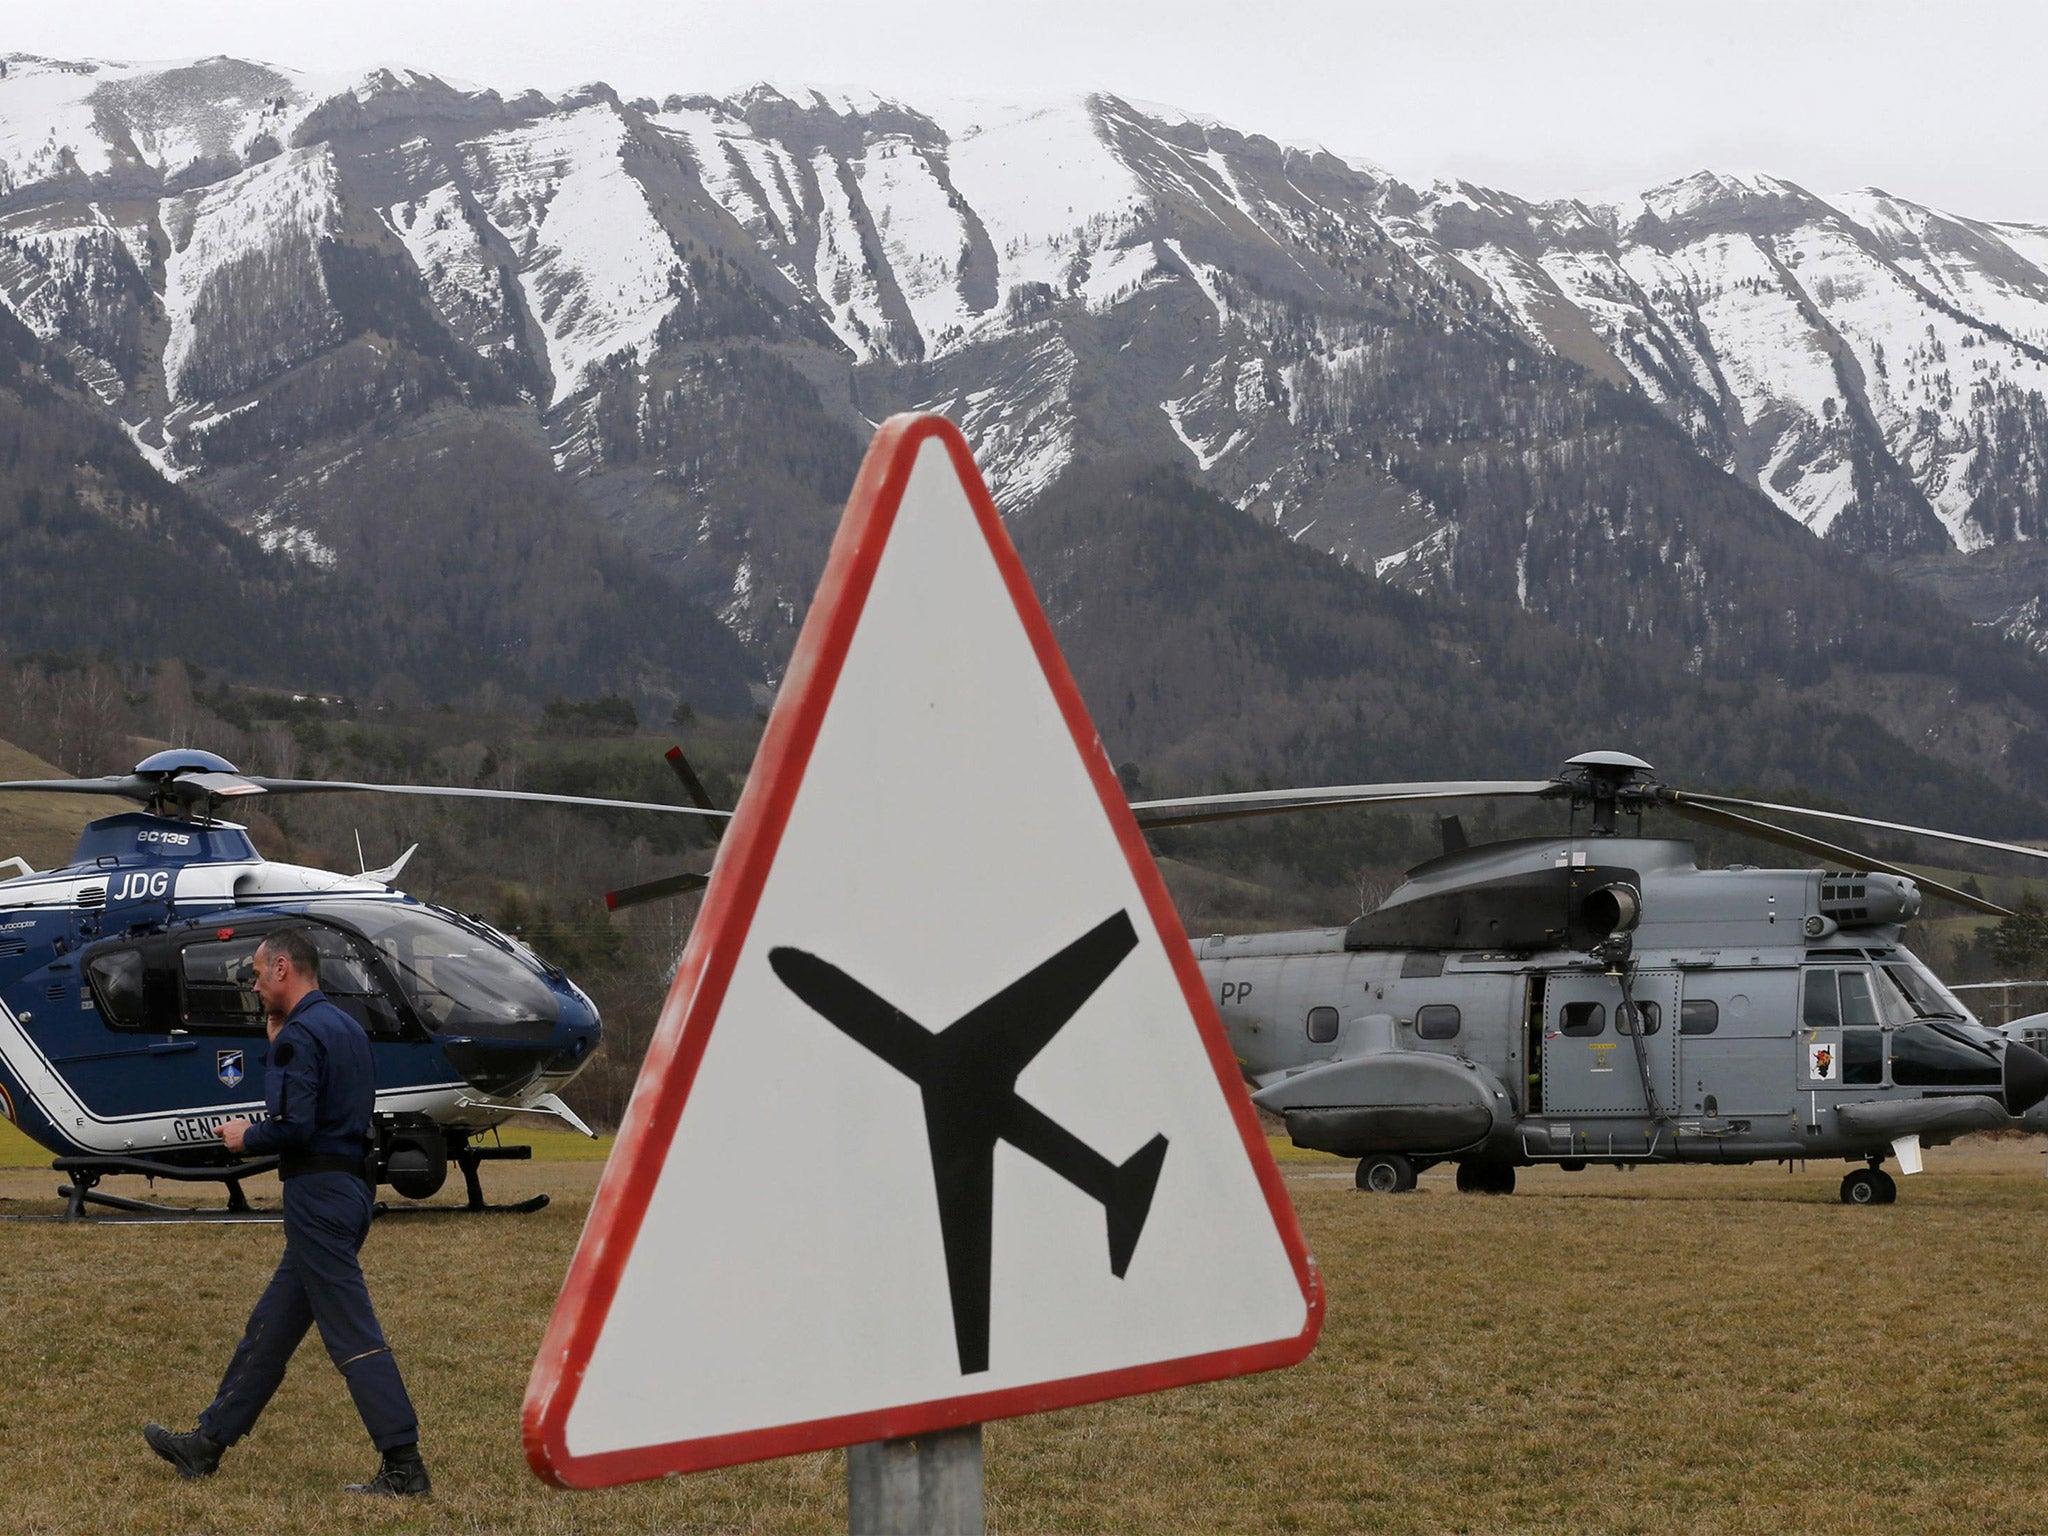 Rescue helicopters from the French Gendarmerie and the Air Force are seen in front of the French Alps during a rescue operation near to the crash site